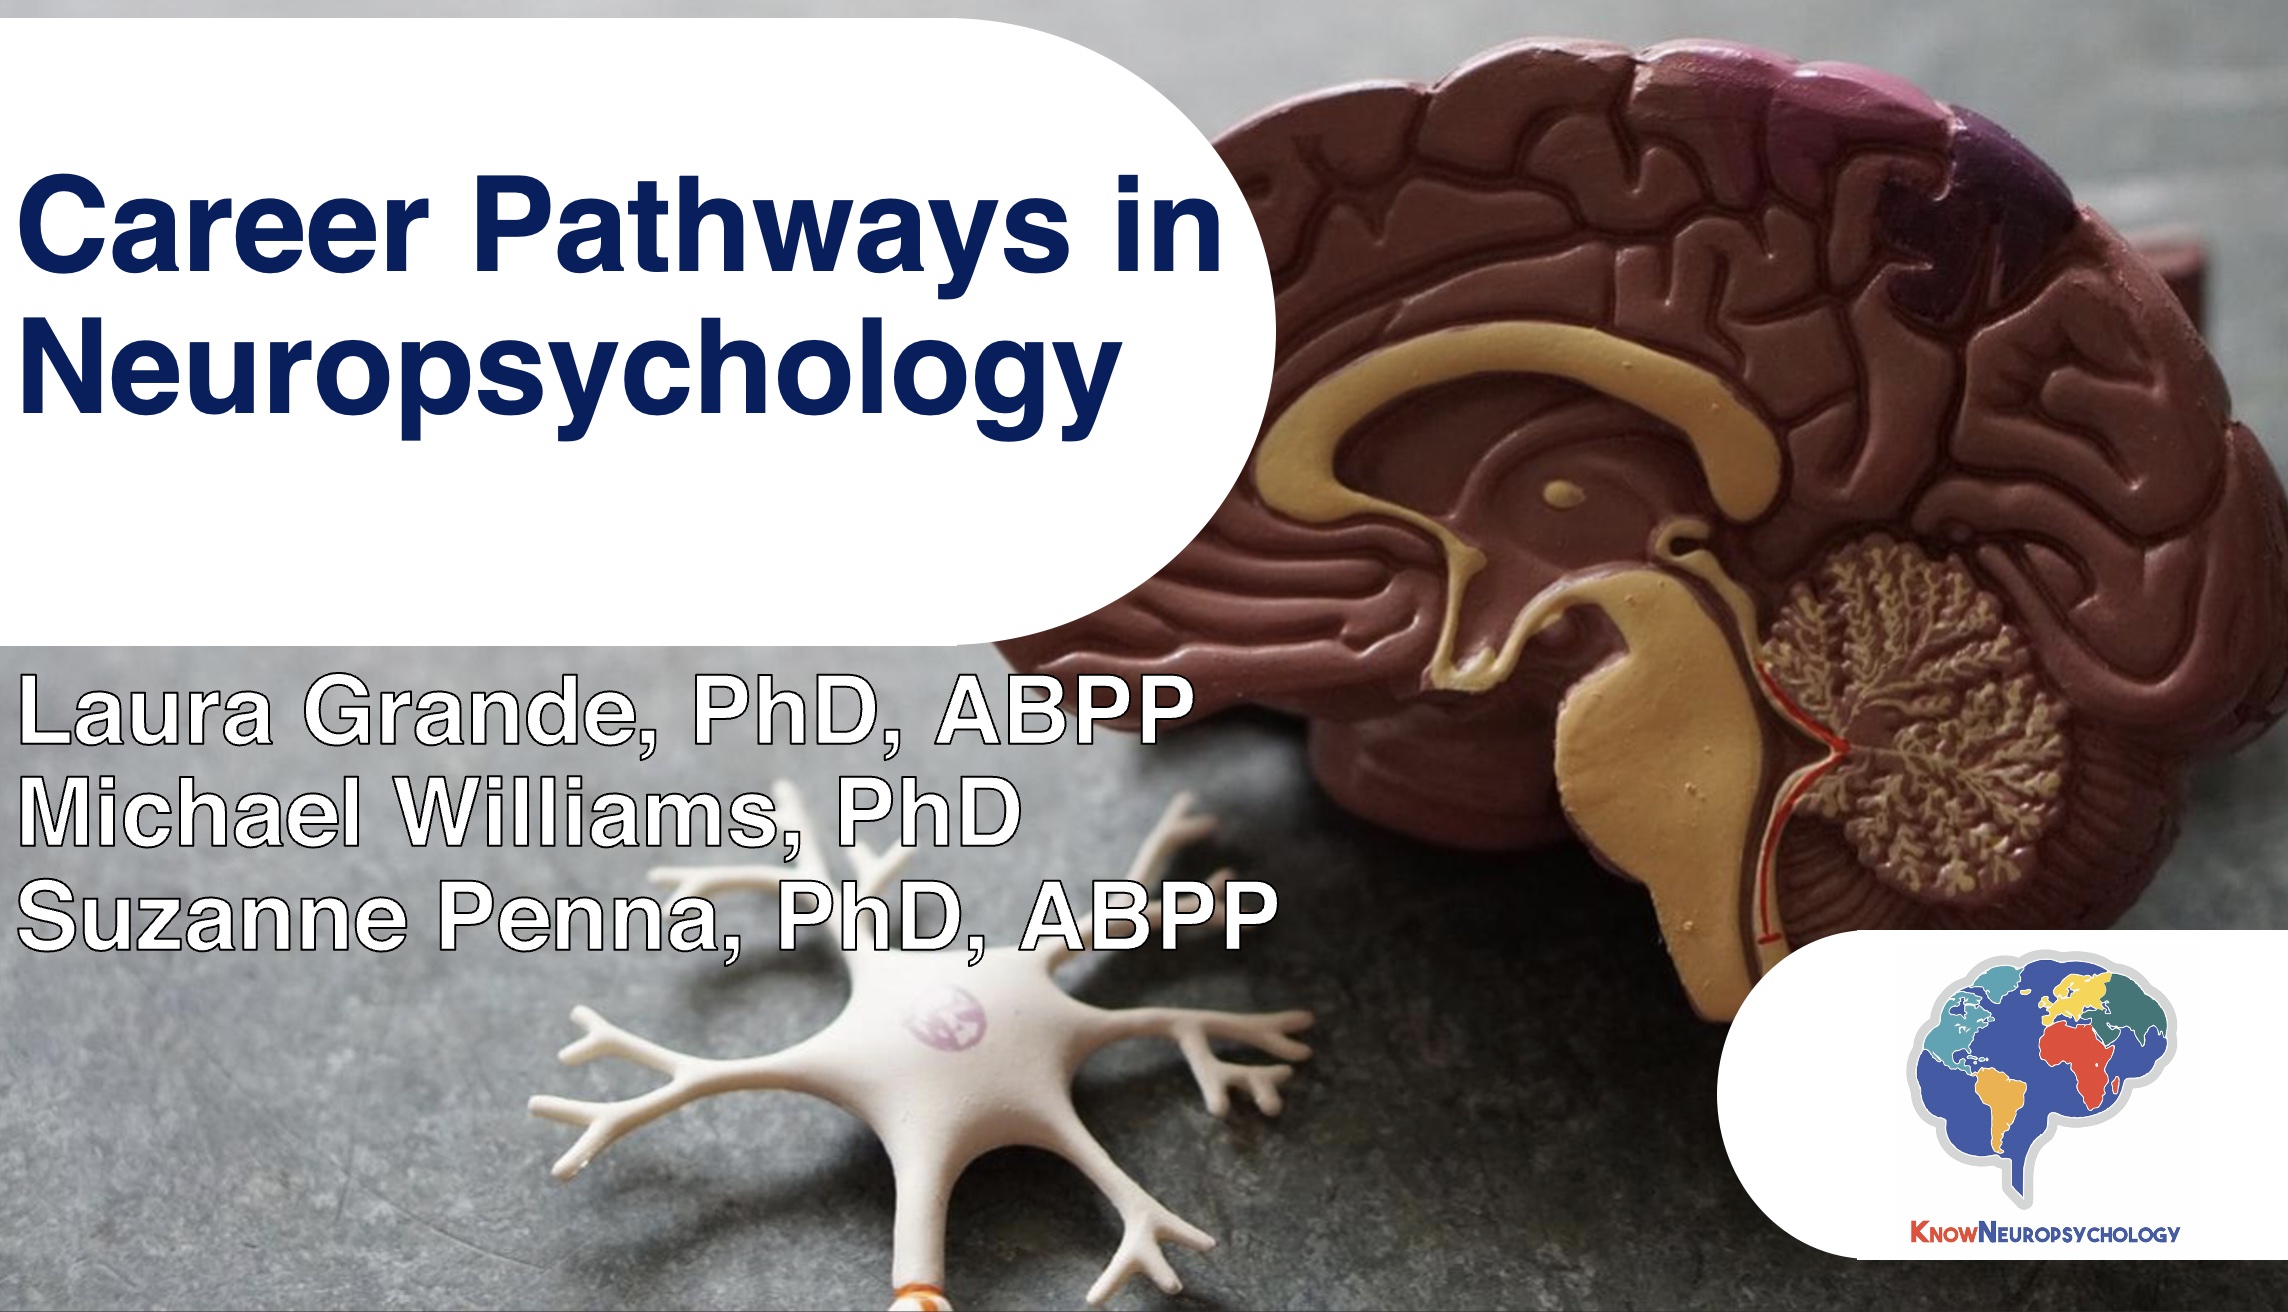 Career pathways in neuropsychology with Dr. Laura Grande, Dr. Michael Williams, and Dr. Suzanne Penna